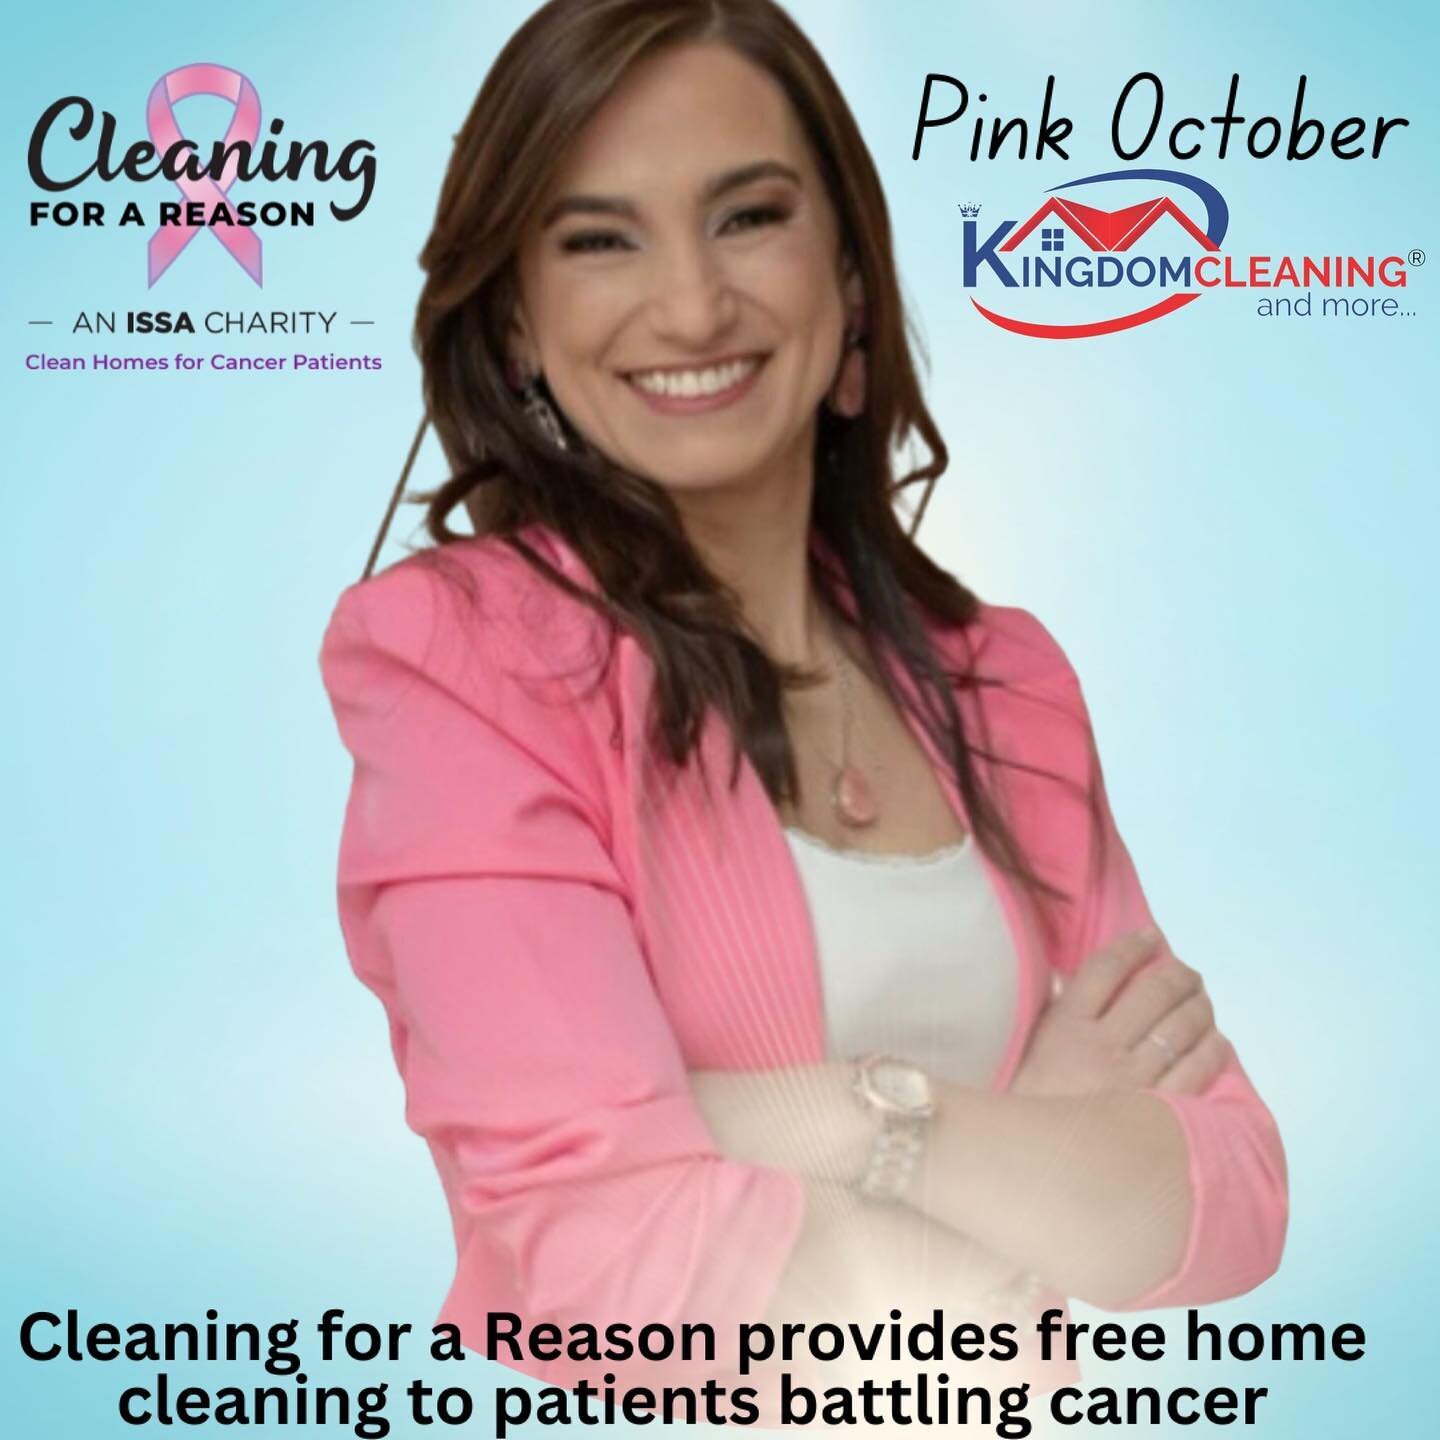 We clean the homes of cancer patients to provide hope, relief, control, and cleanliness. 

It's been 2 months since we partnered with Cleaning for a Reason and we've already had the pleasure of help two brave women who are battling cancer. My team fe